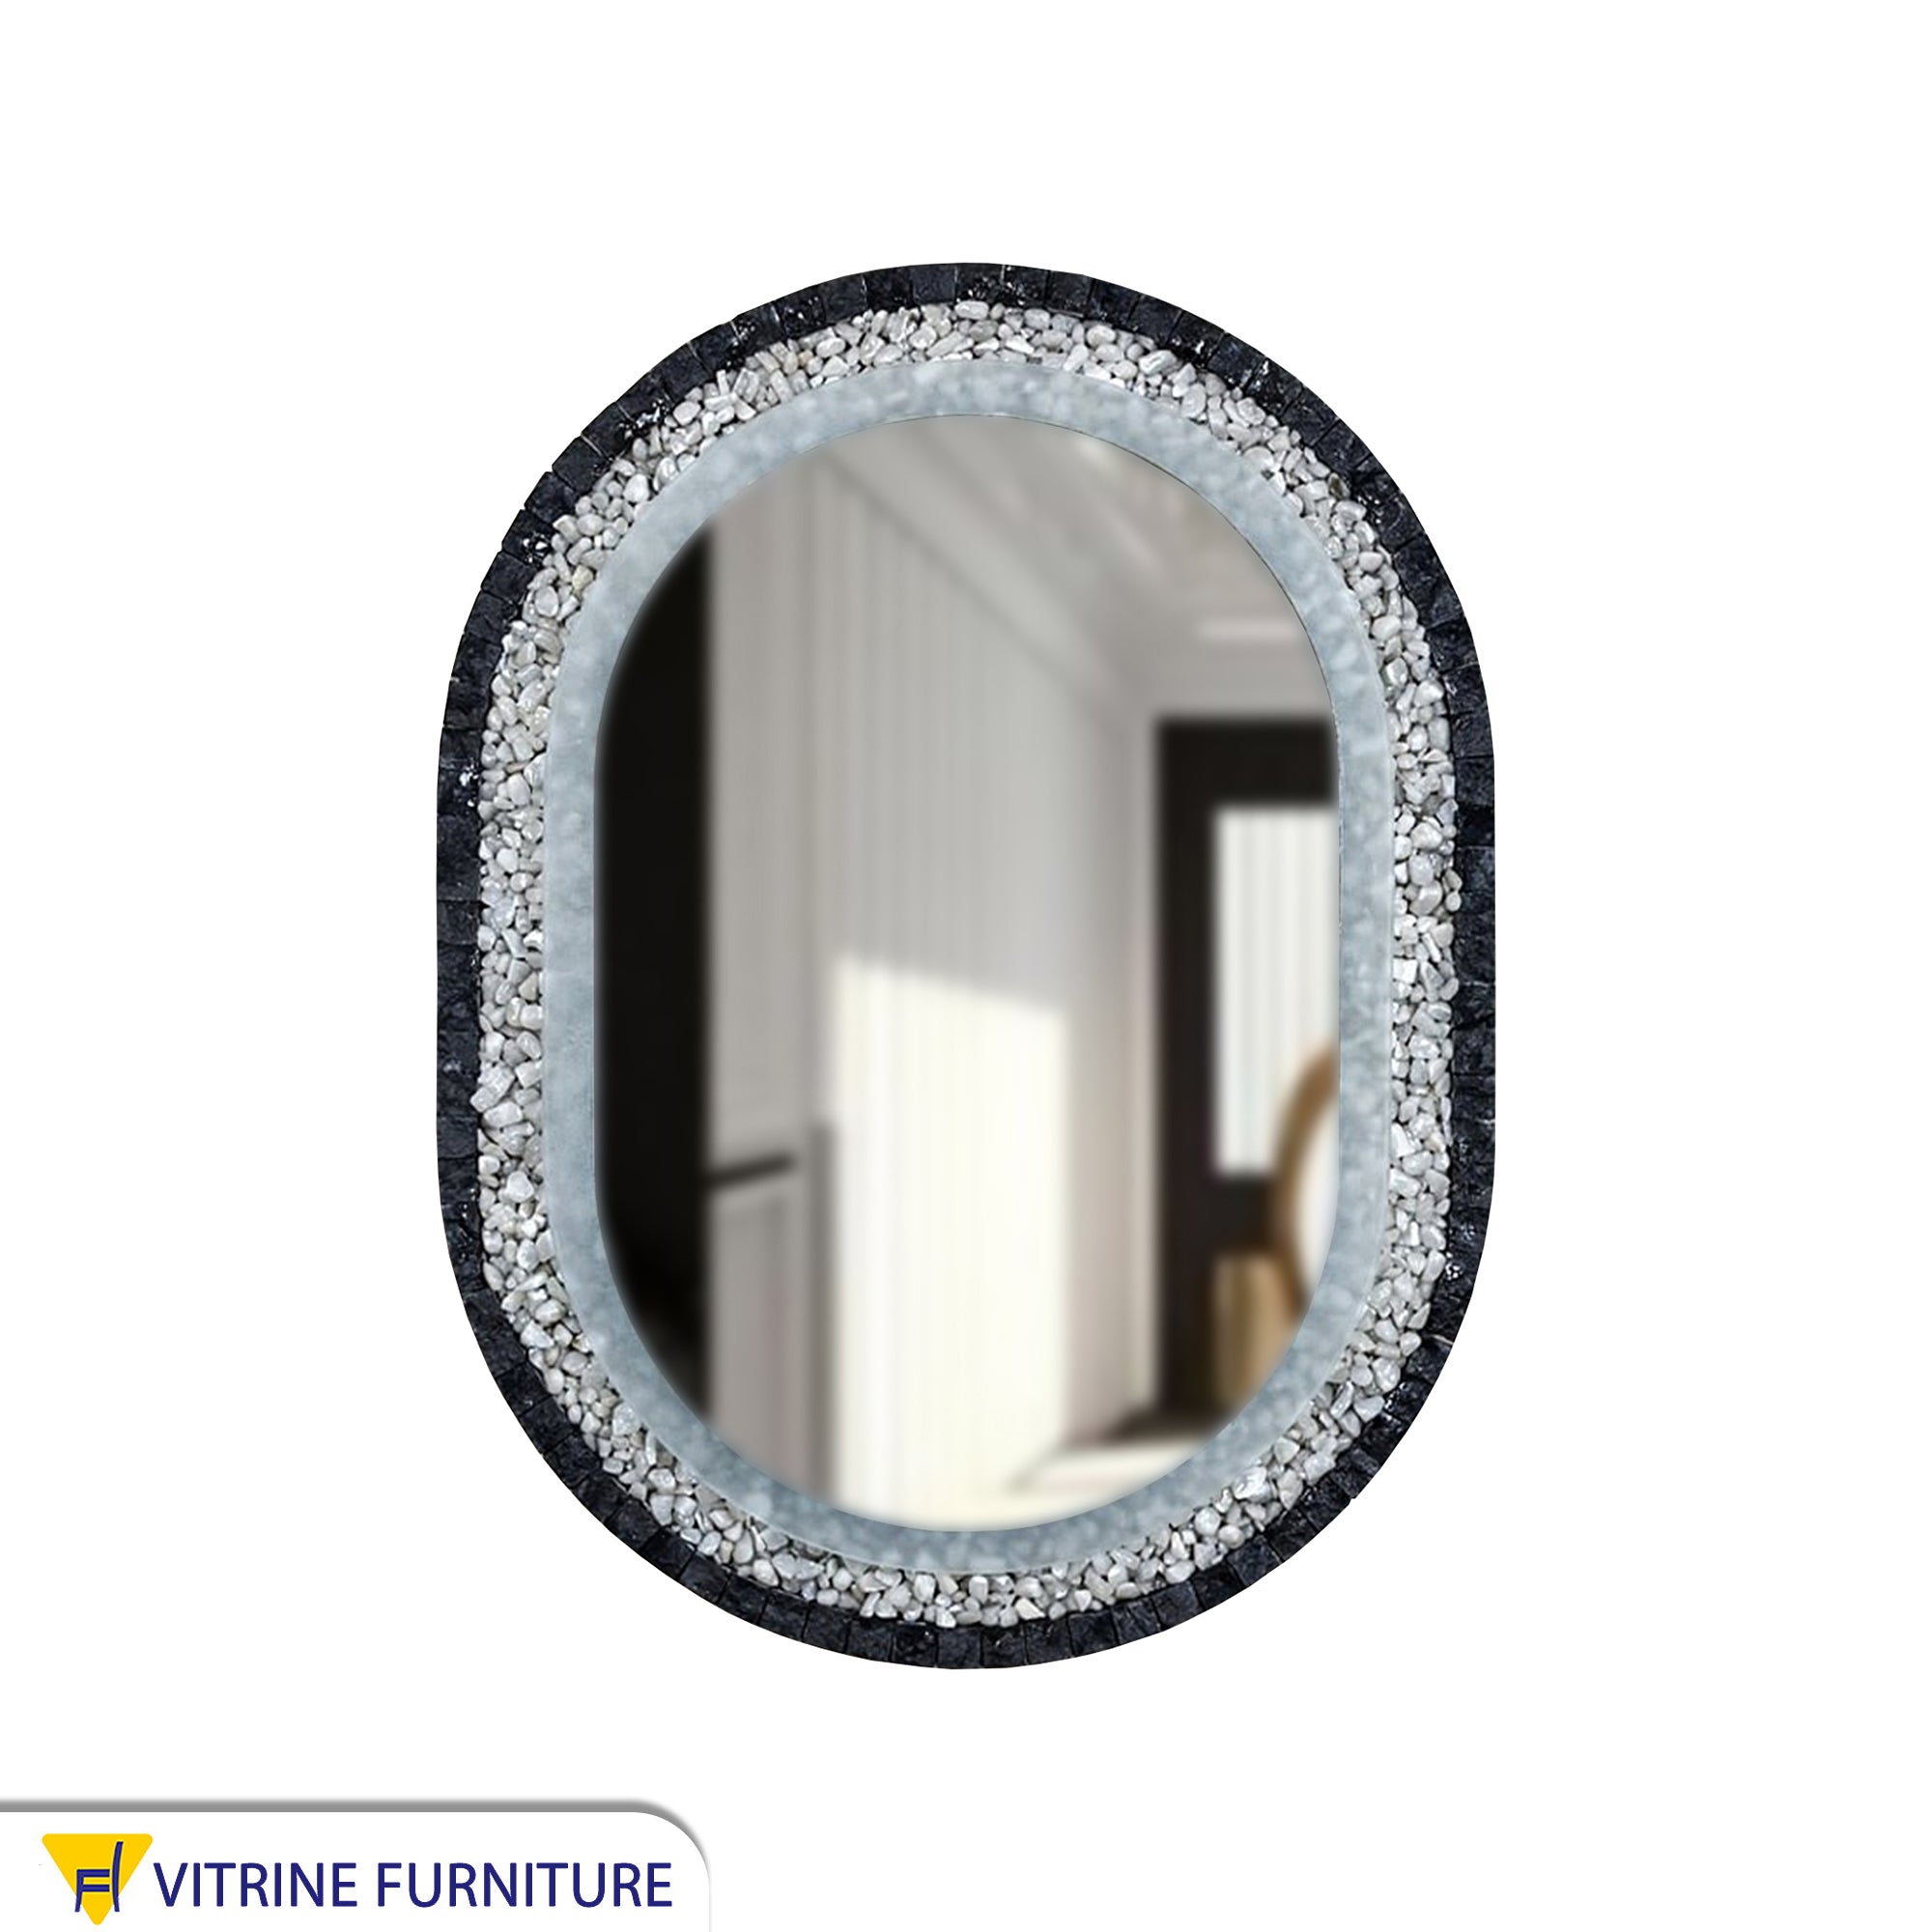 LED mirror with a black marble and stone frame